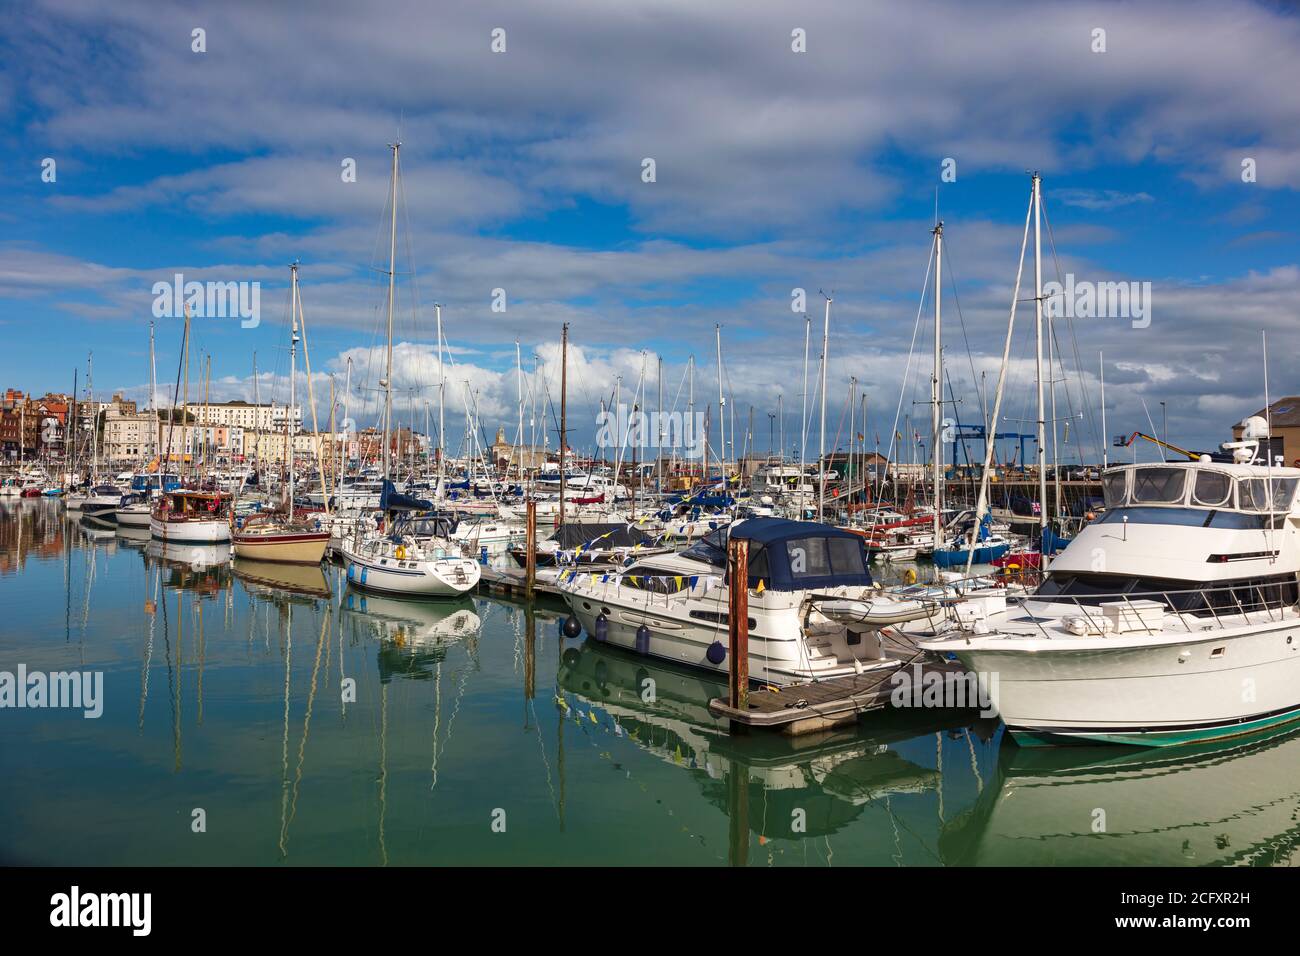 August Bank Holiday on a hot day around Ramsgate Royal Harbour, with moored yachts and boats,Kent, UK Stock Photo